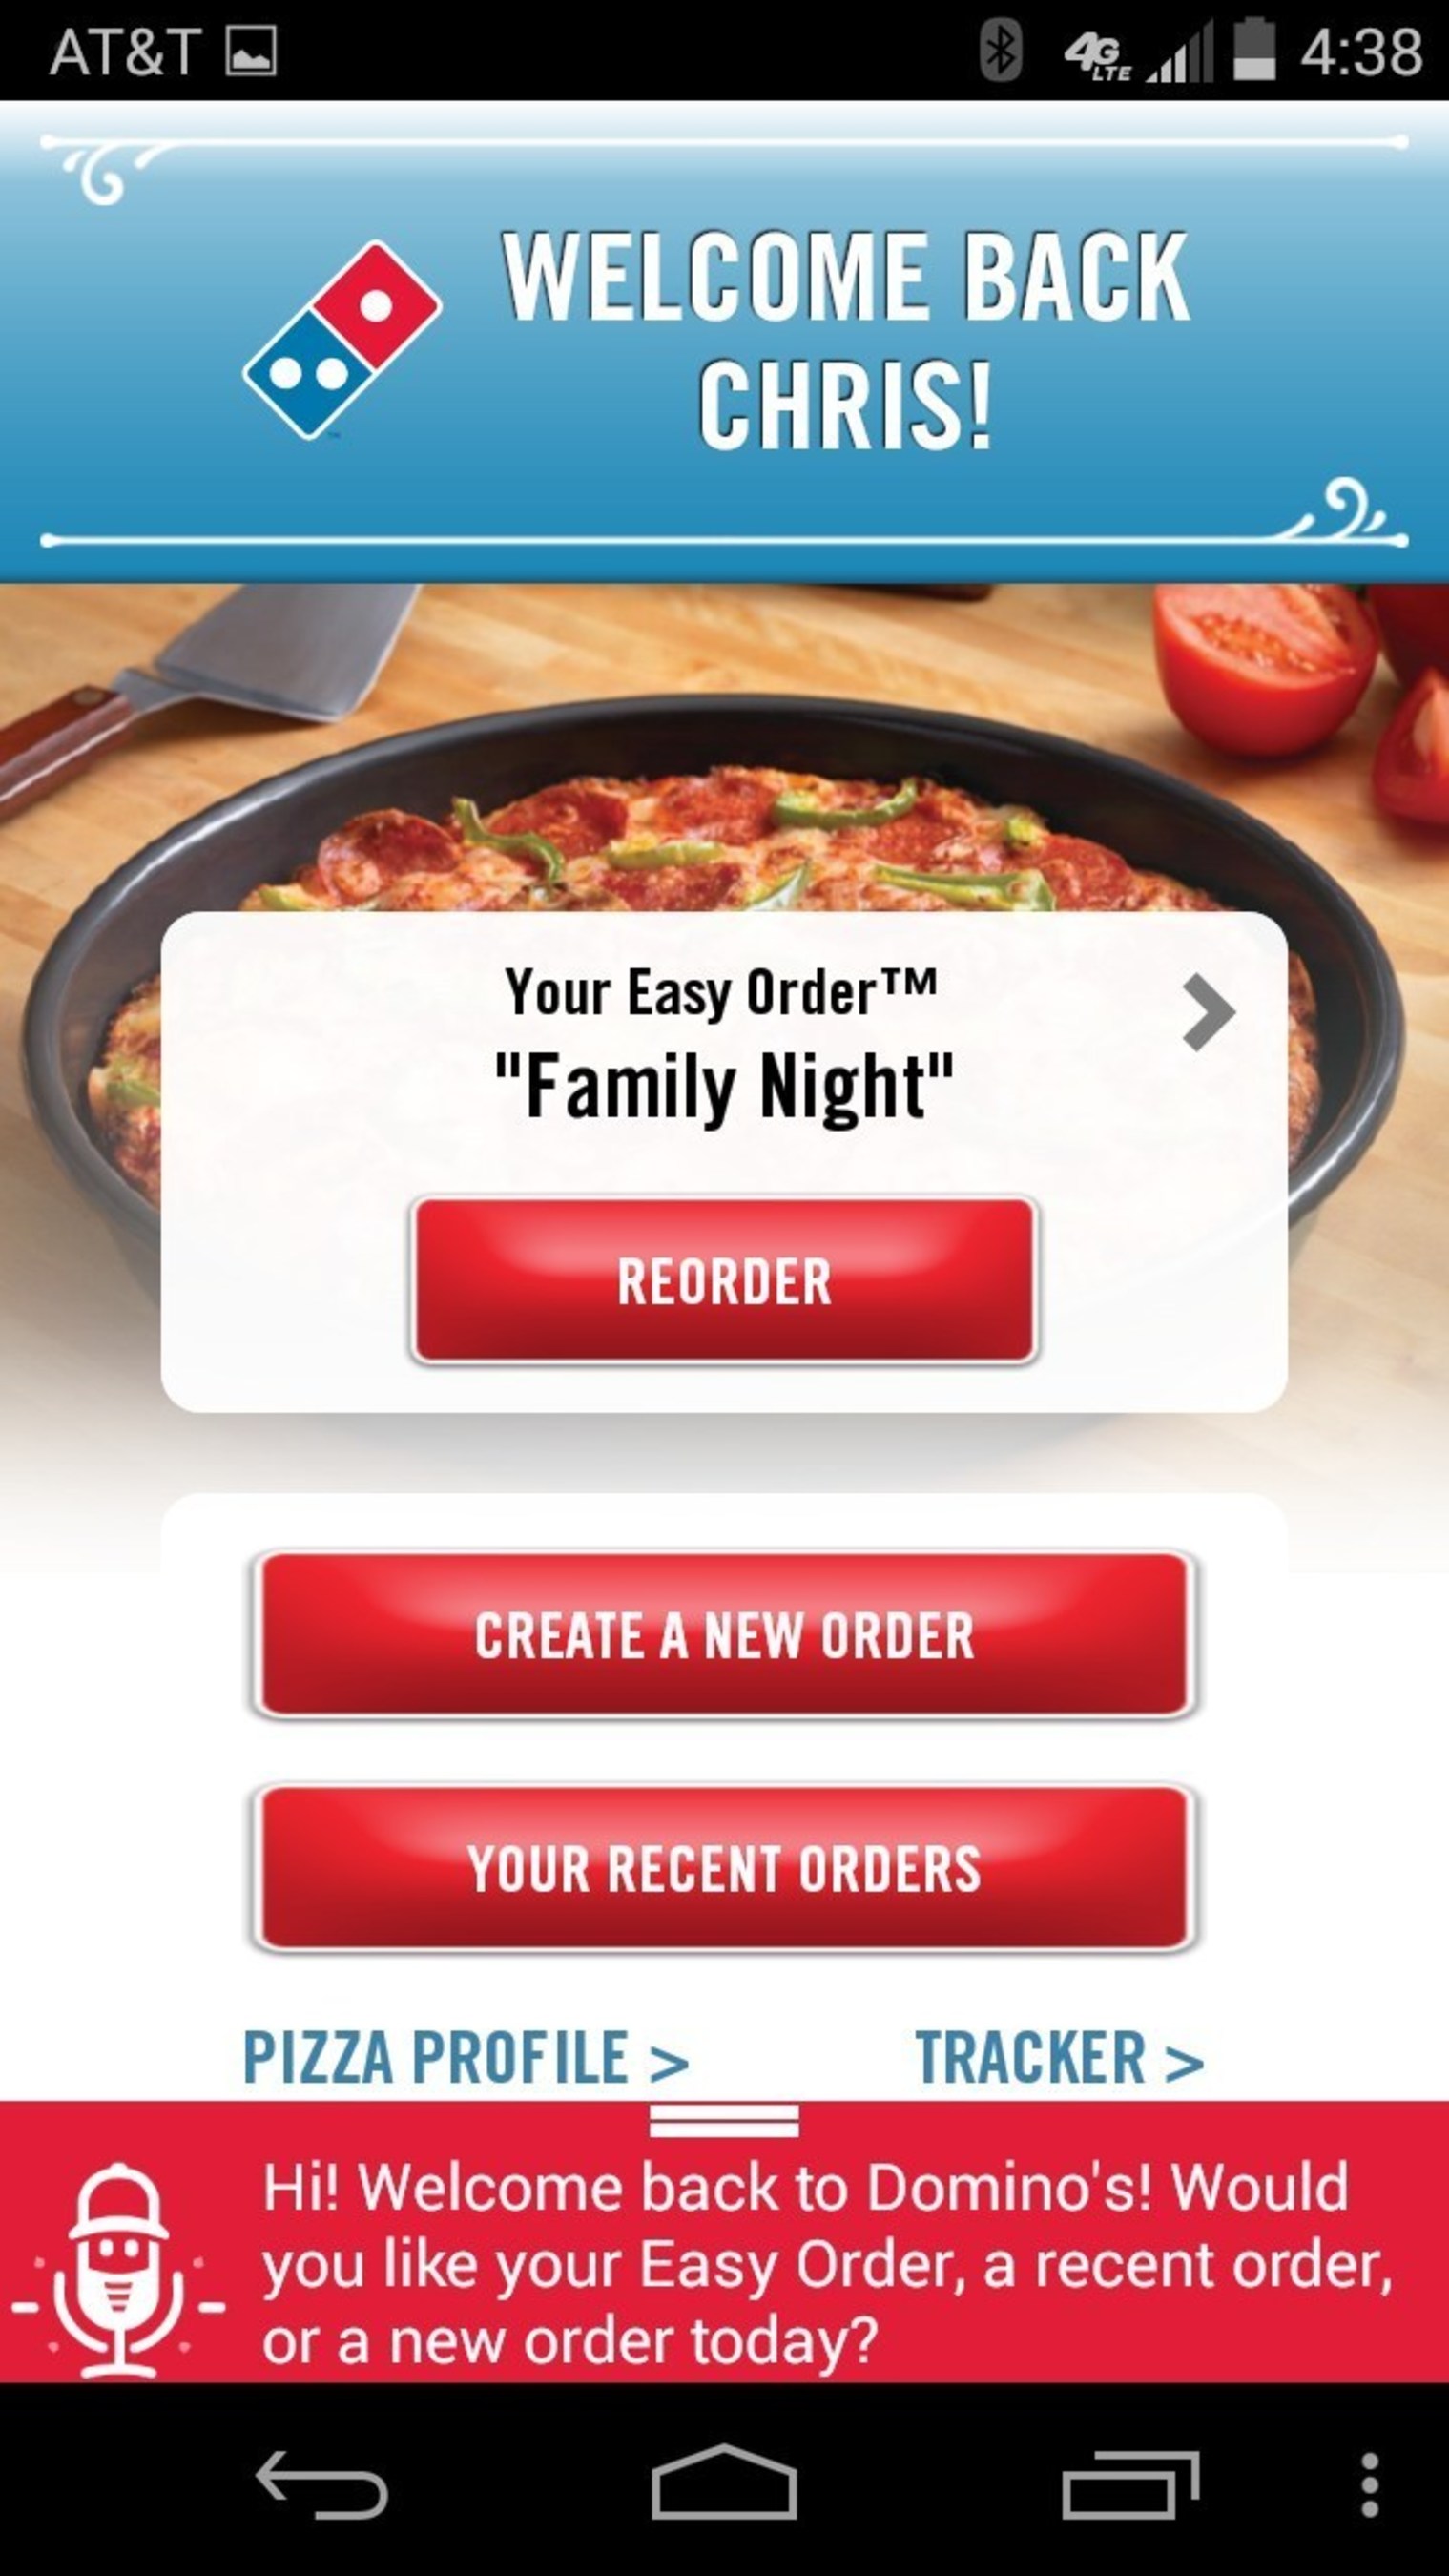 Domino's Pizza has found its voice. Dom, the virtual voice ordering assistant for Domino's, is at your service via Domino's ordering apps for iPhone(R) and Android(TM). (PRNewsFoto/Domino's Pizza)